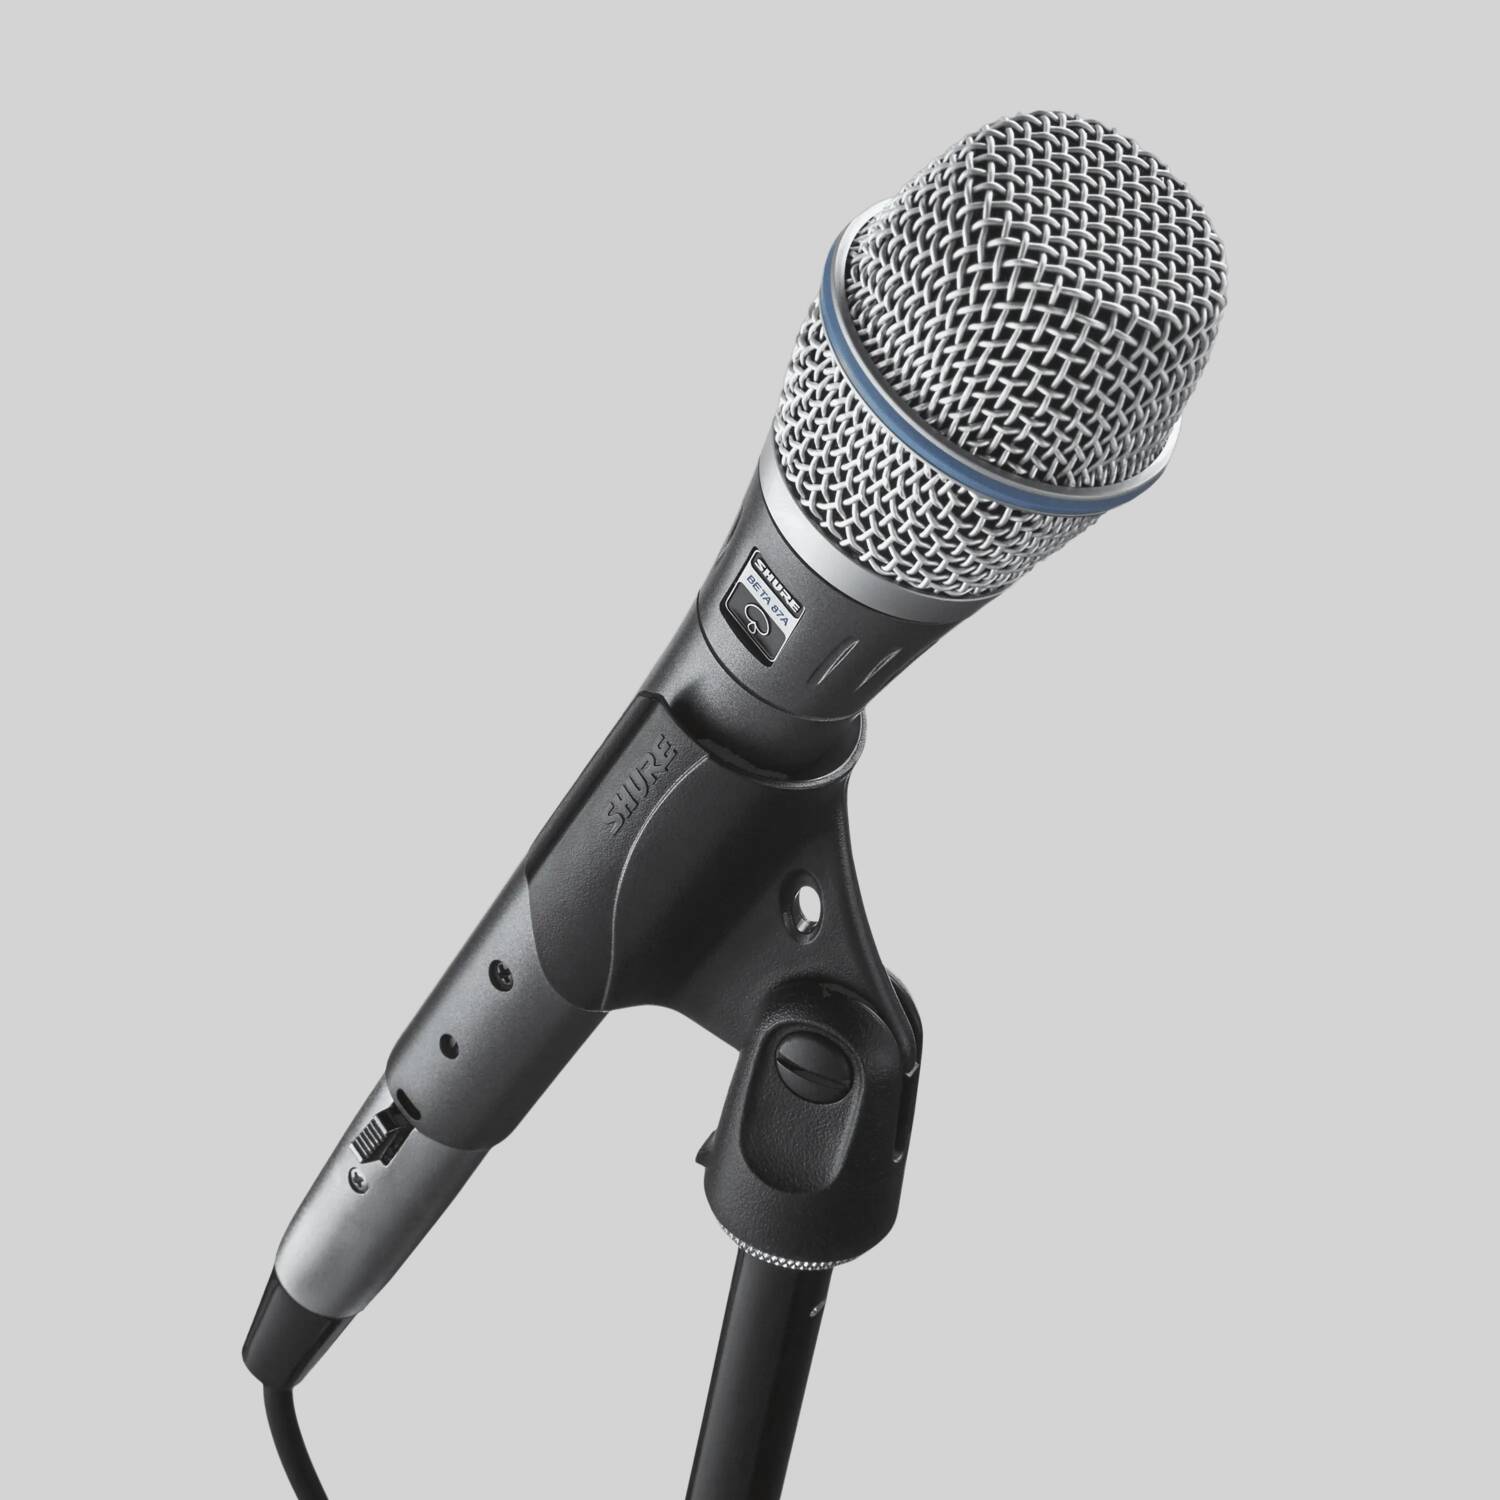 BETA 87A - Vocal Microphone - Shure Middle East and Africa